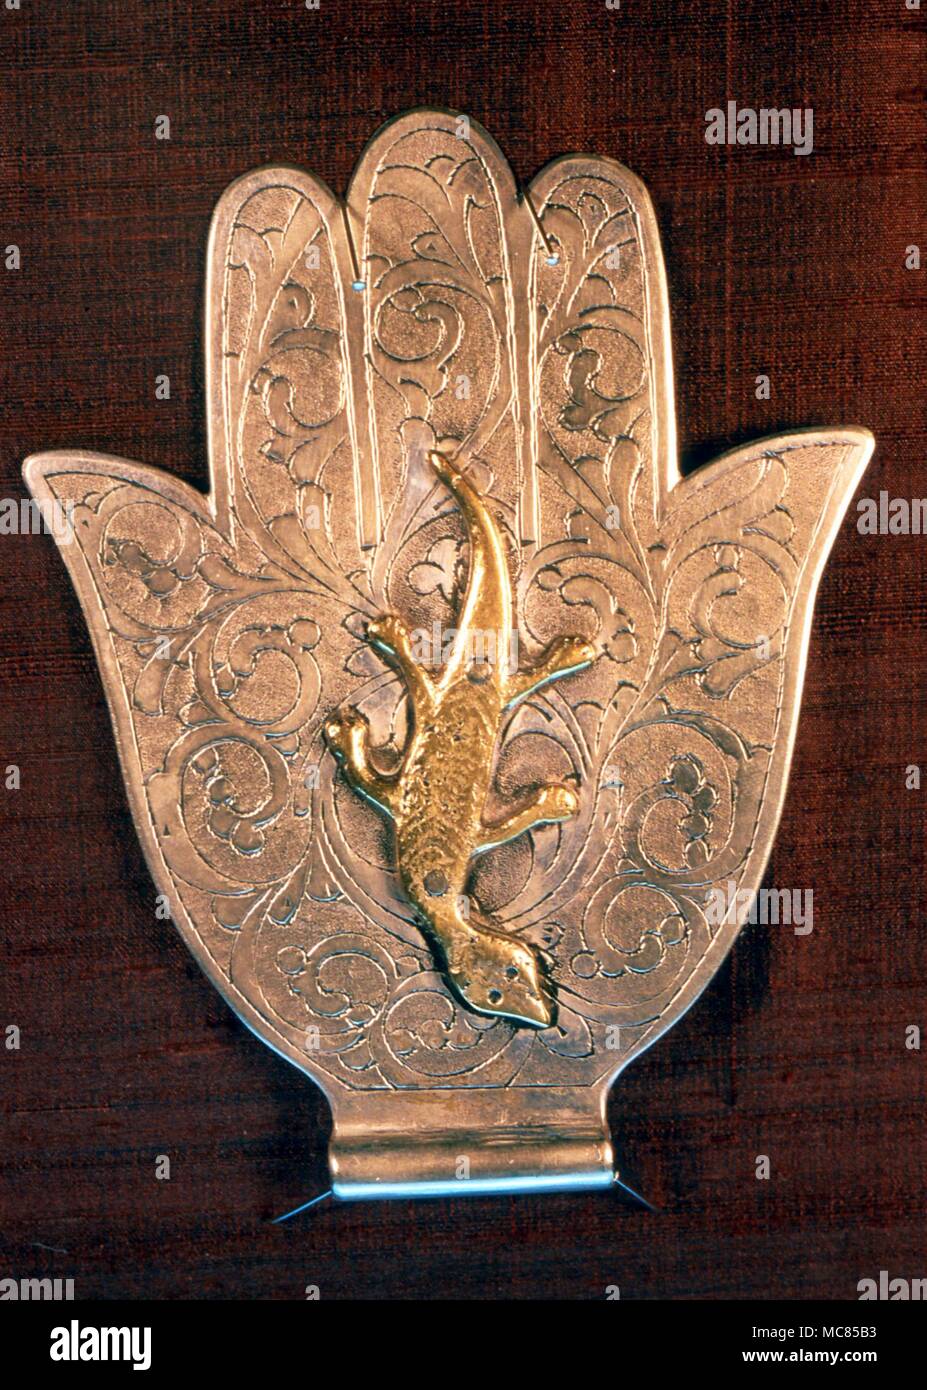 Khamsa, or Hand of Fatima. Unusual khamsa, the hand which turns aside the evil eye, with lizard in place of the magic eye. Arabic, 19th century, from Tariq Rajab Museum. Stock Photo